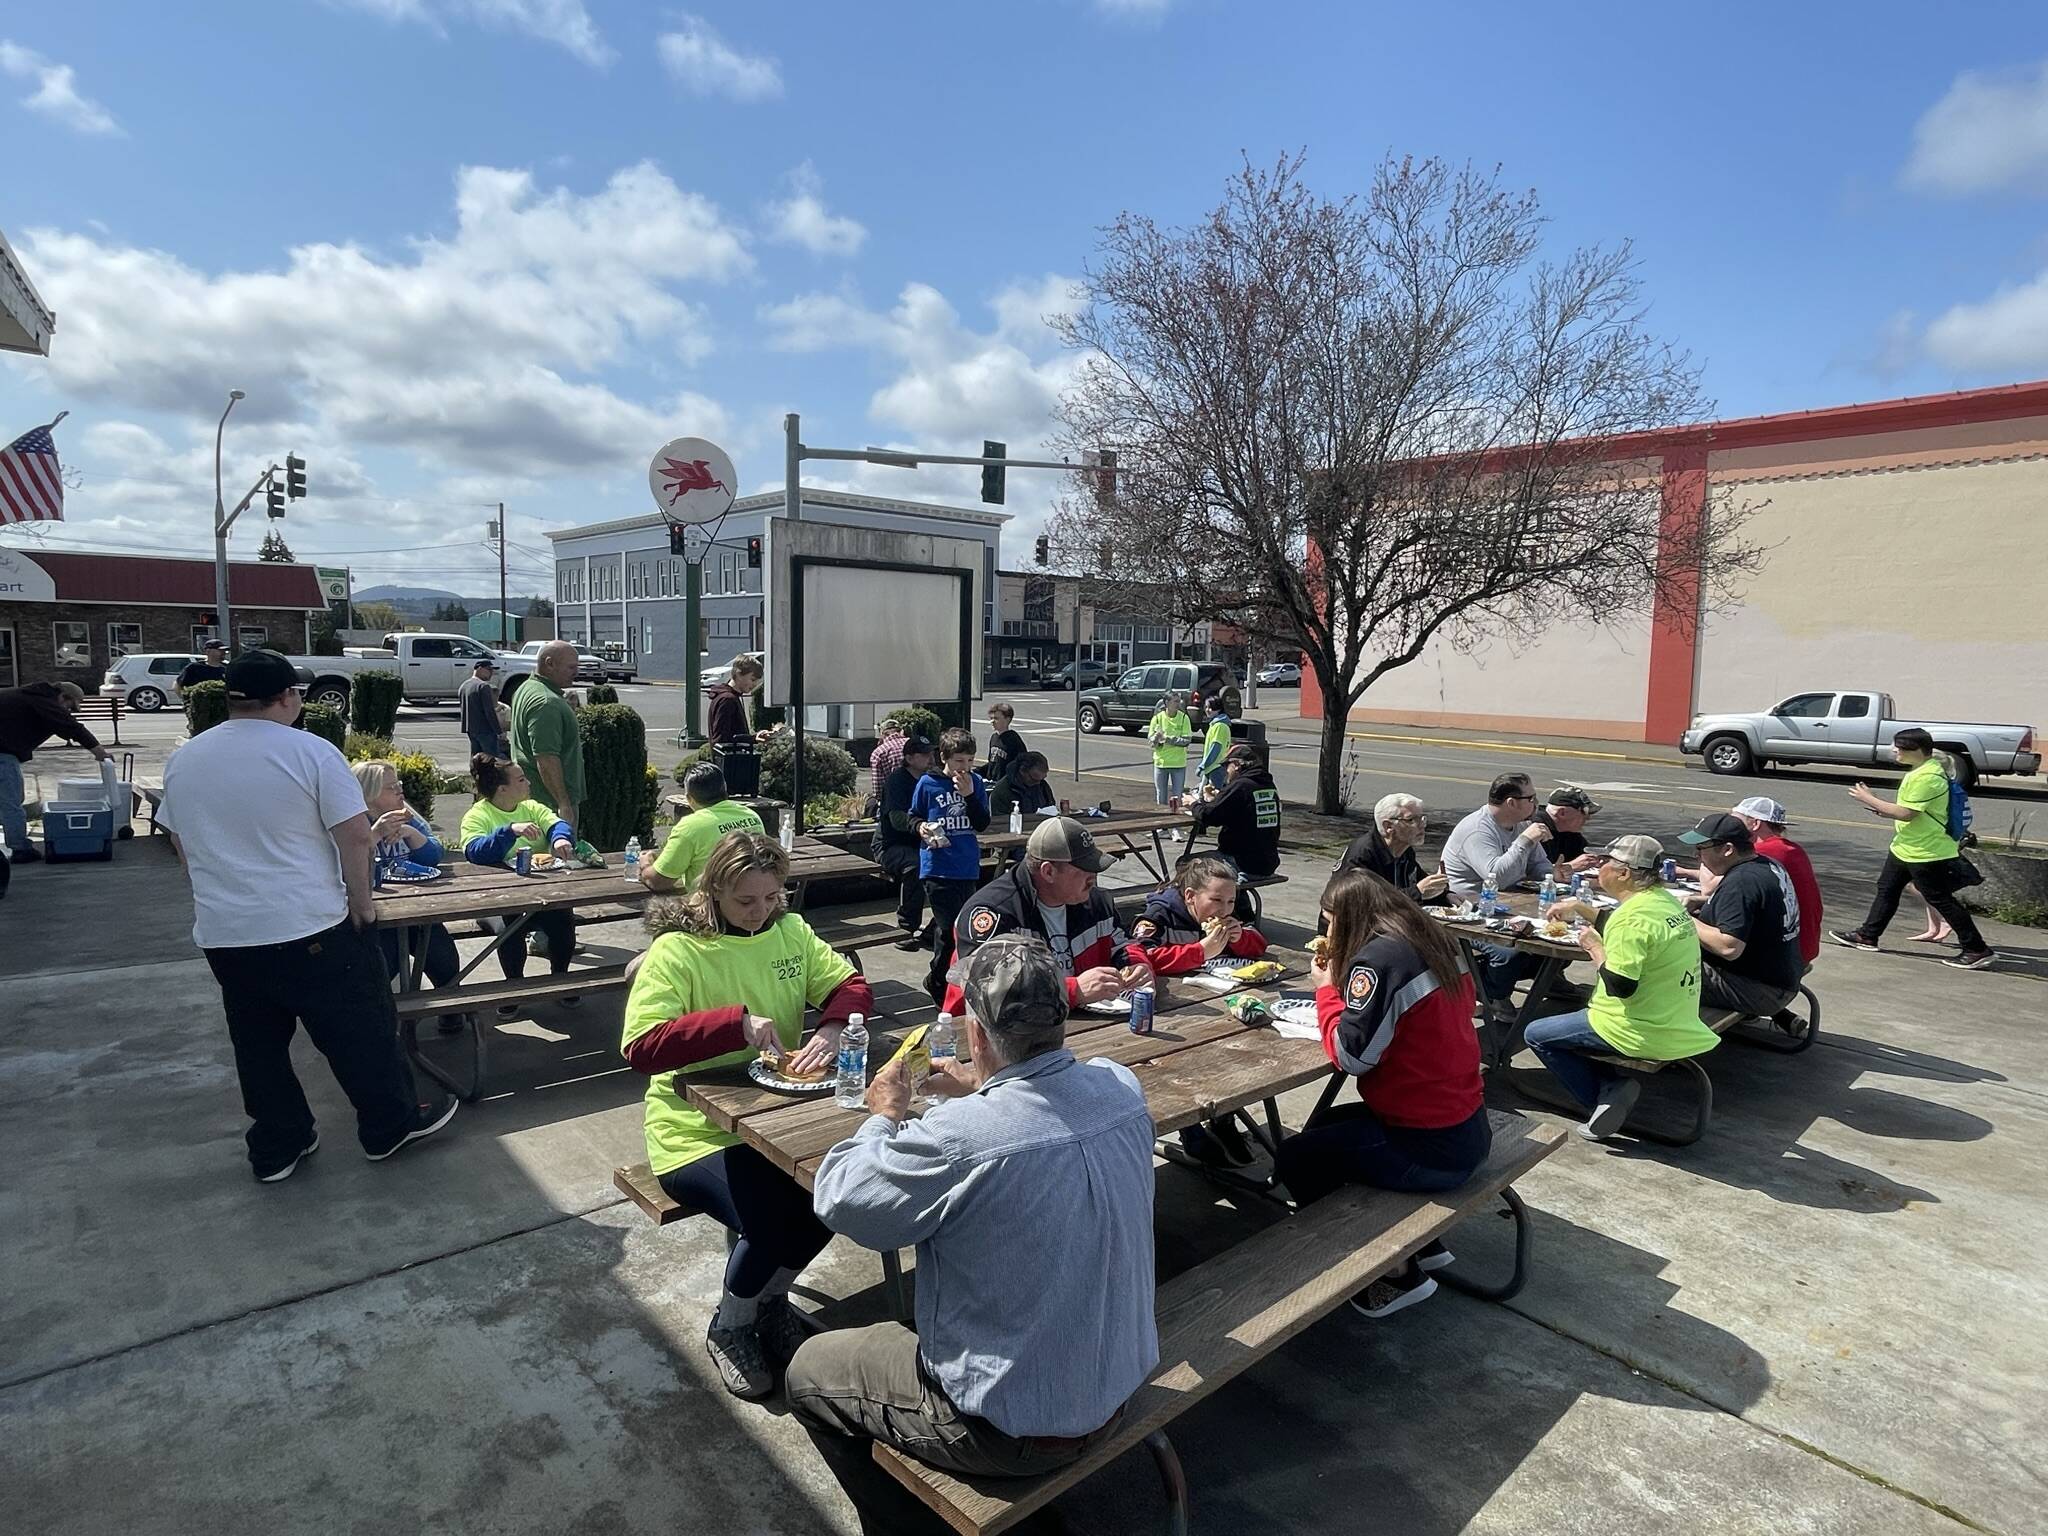 Elma Chamber of Commerce
In an effort to help clean up the city of Elma, local volunteers and city officials will kick off the second annual Elma Enhance cleanup on Saturday, April 22. Food and supplies will be provided to people who participate in the cleanup.